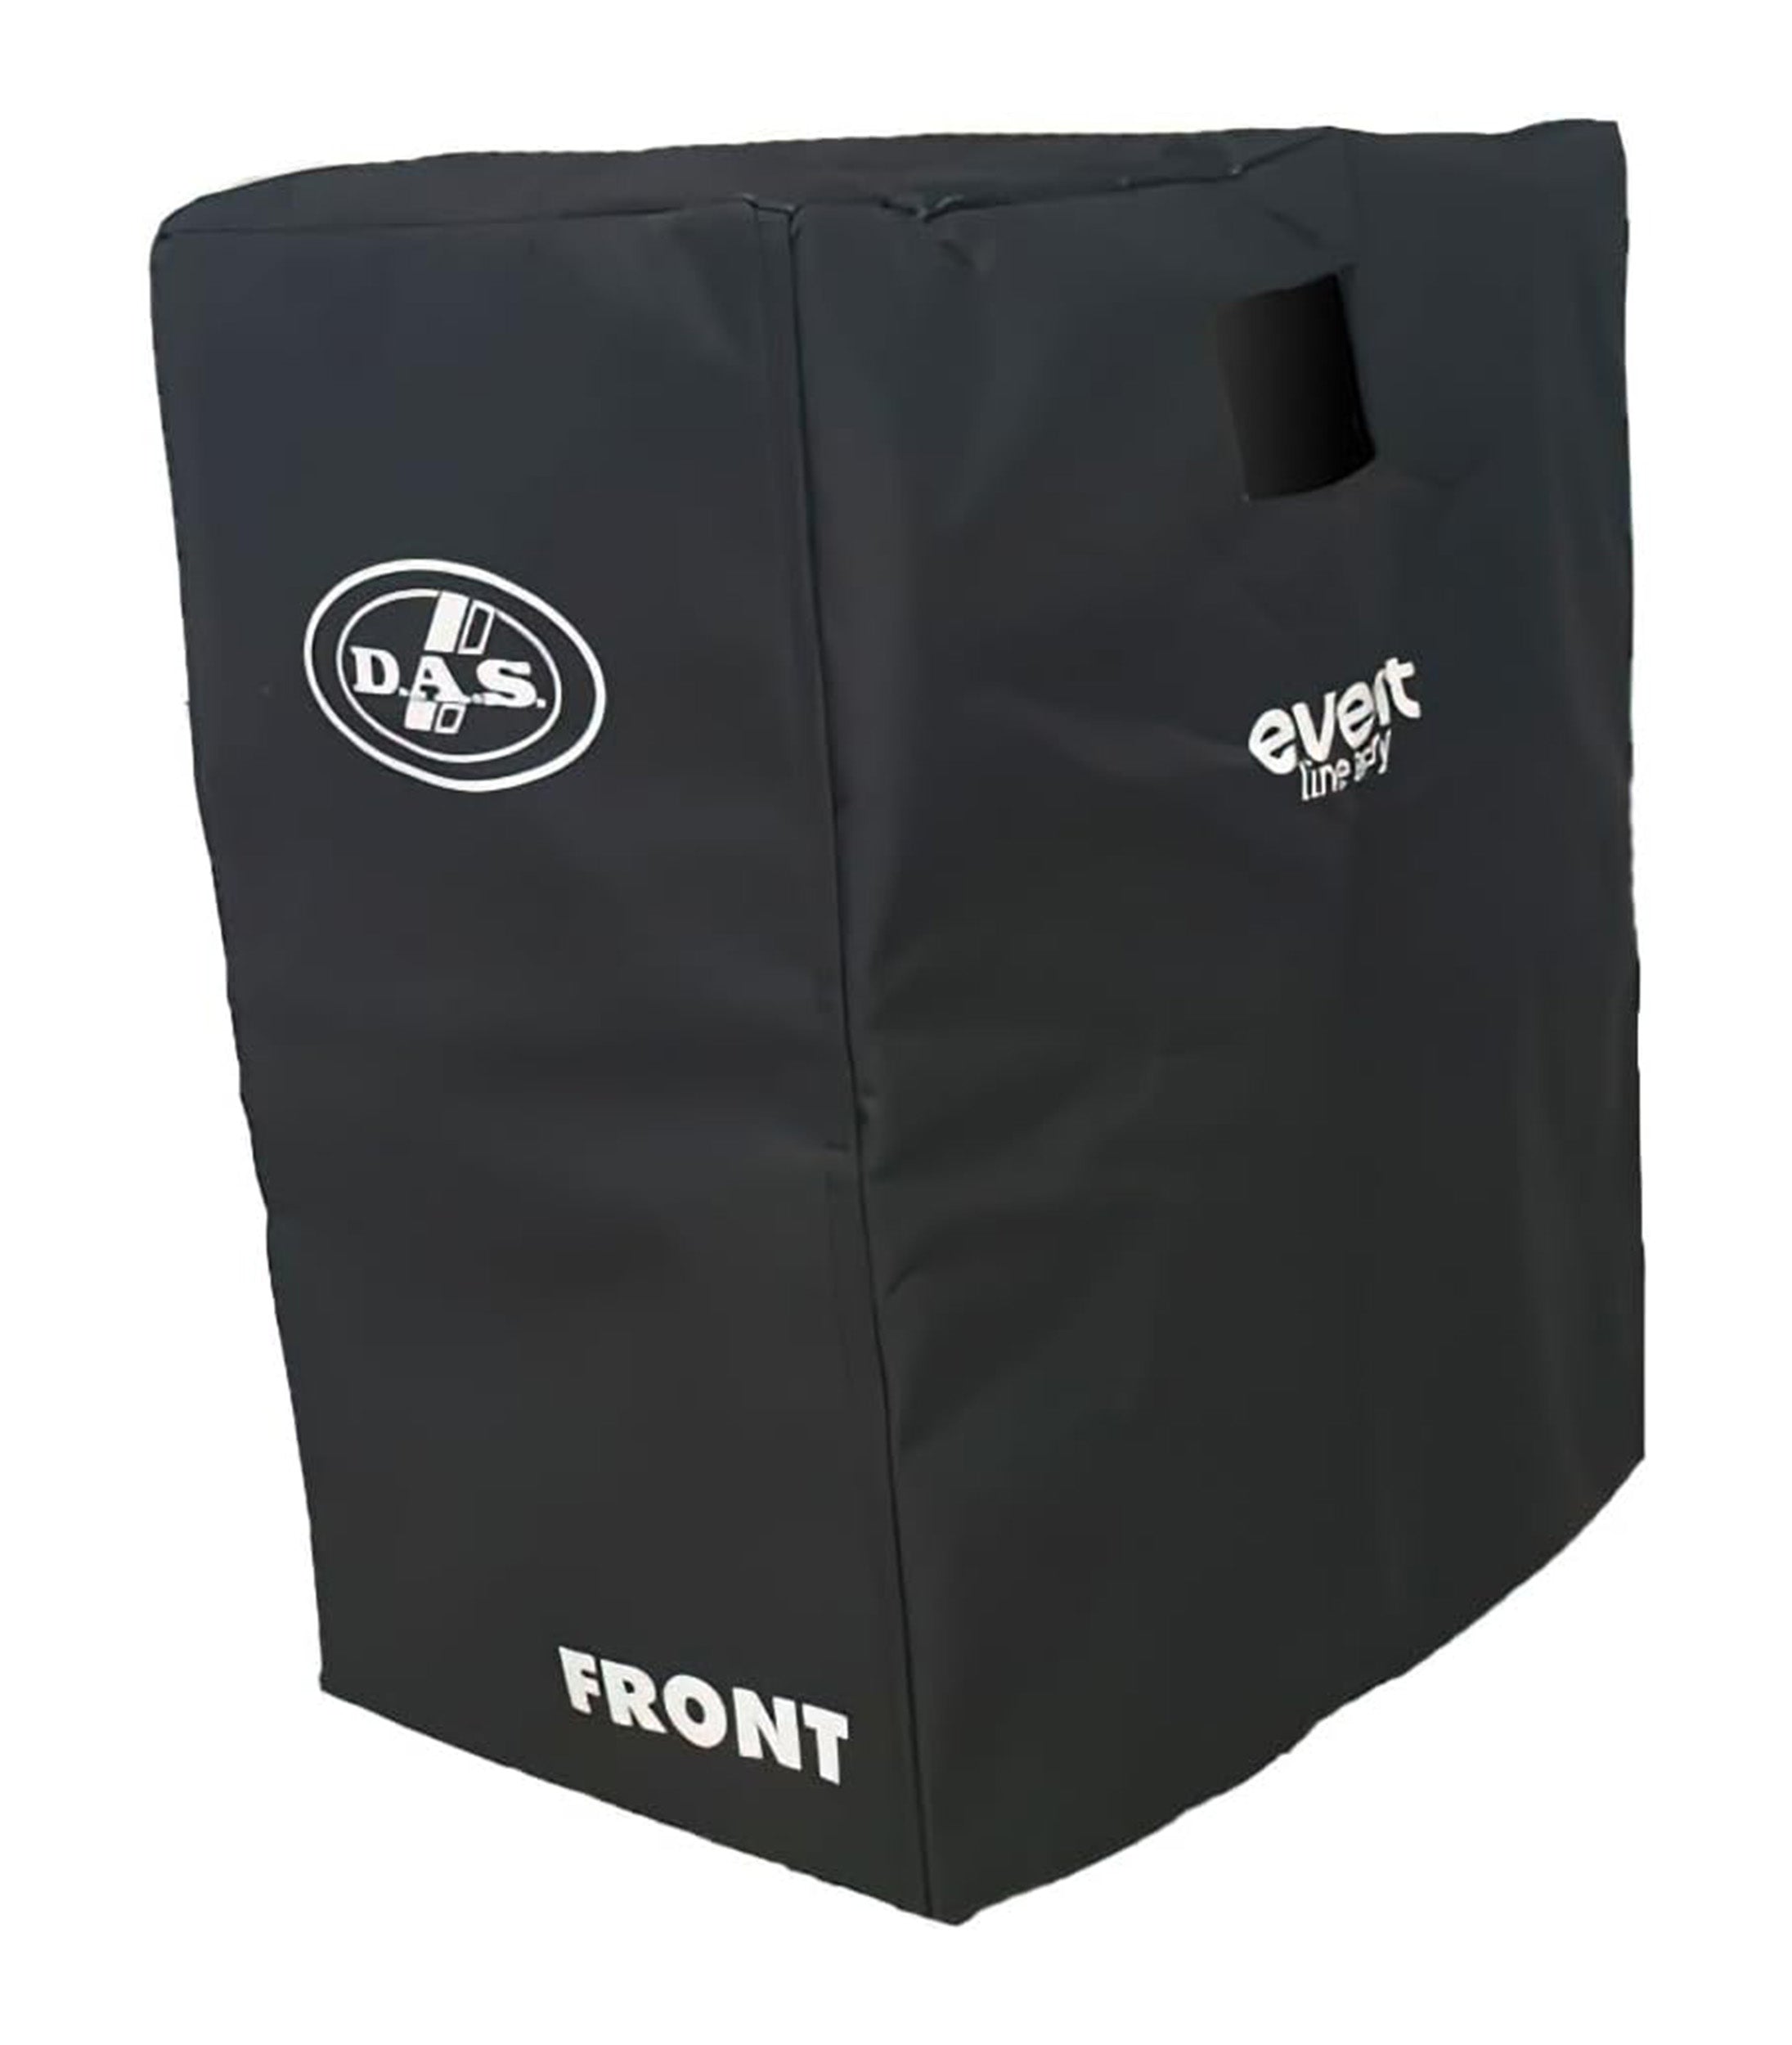 DAS Audio FUN-2-EV118, Protective Transport Cover for 2 Units of EVENT-118A on PL-EV118S - Black by DAS Audio